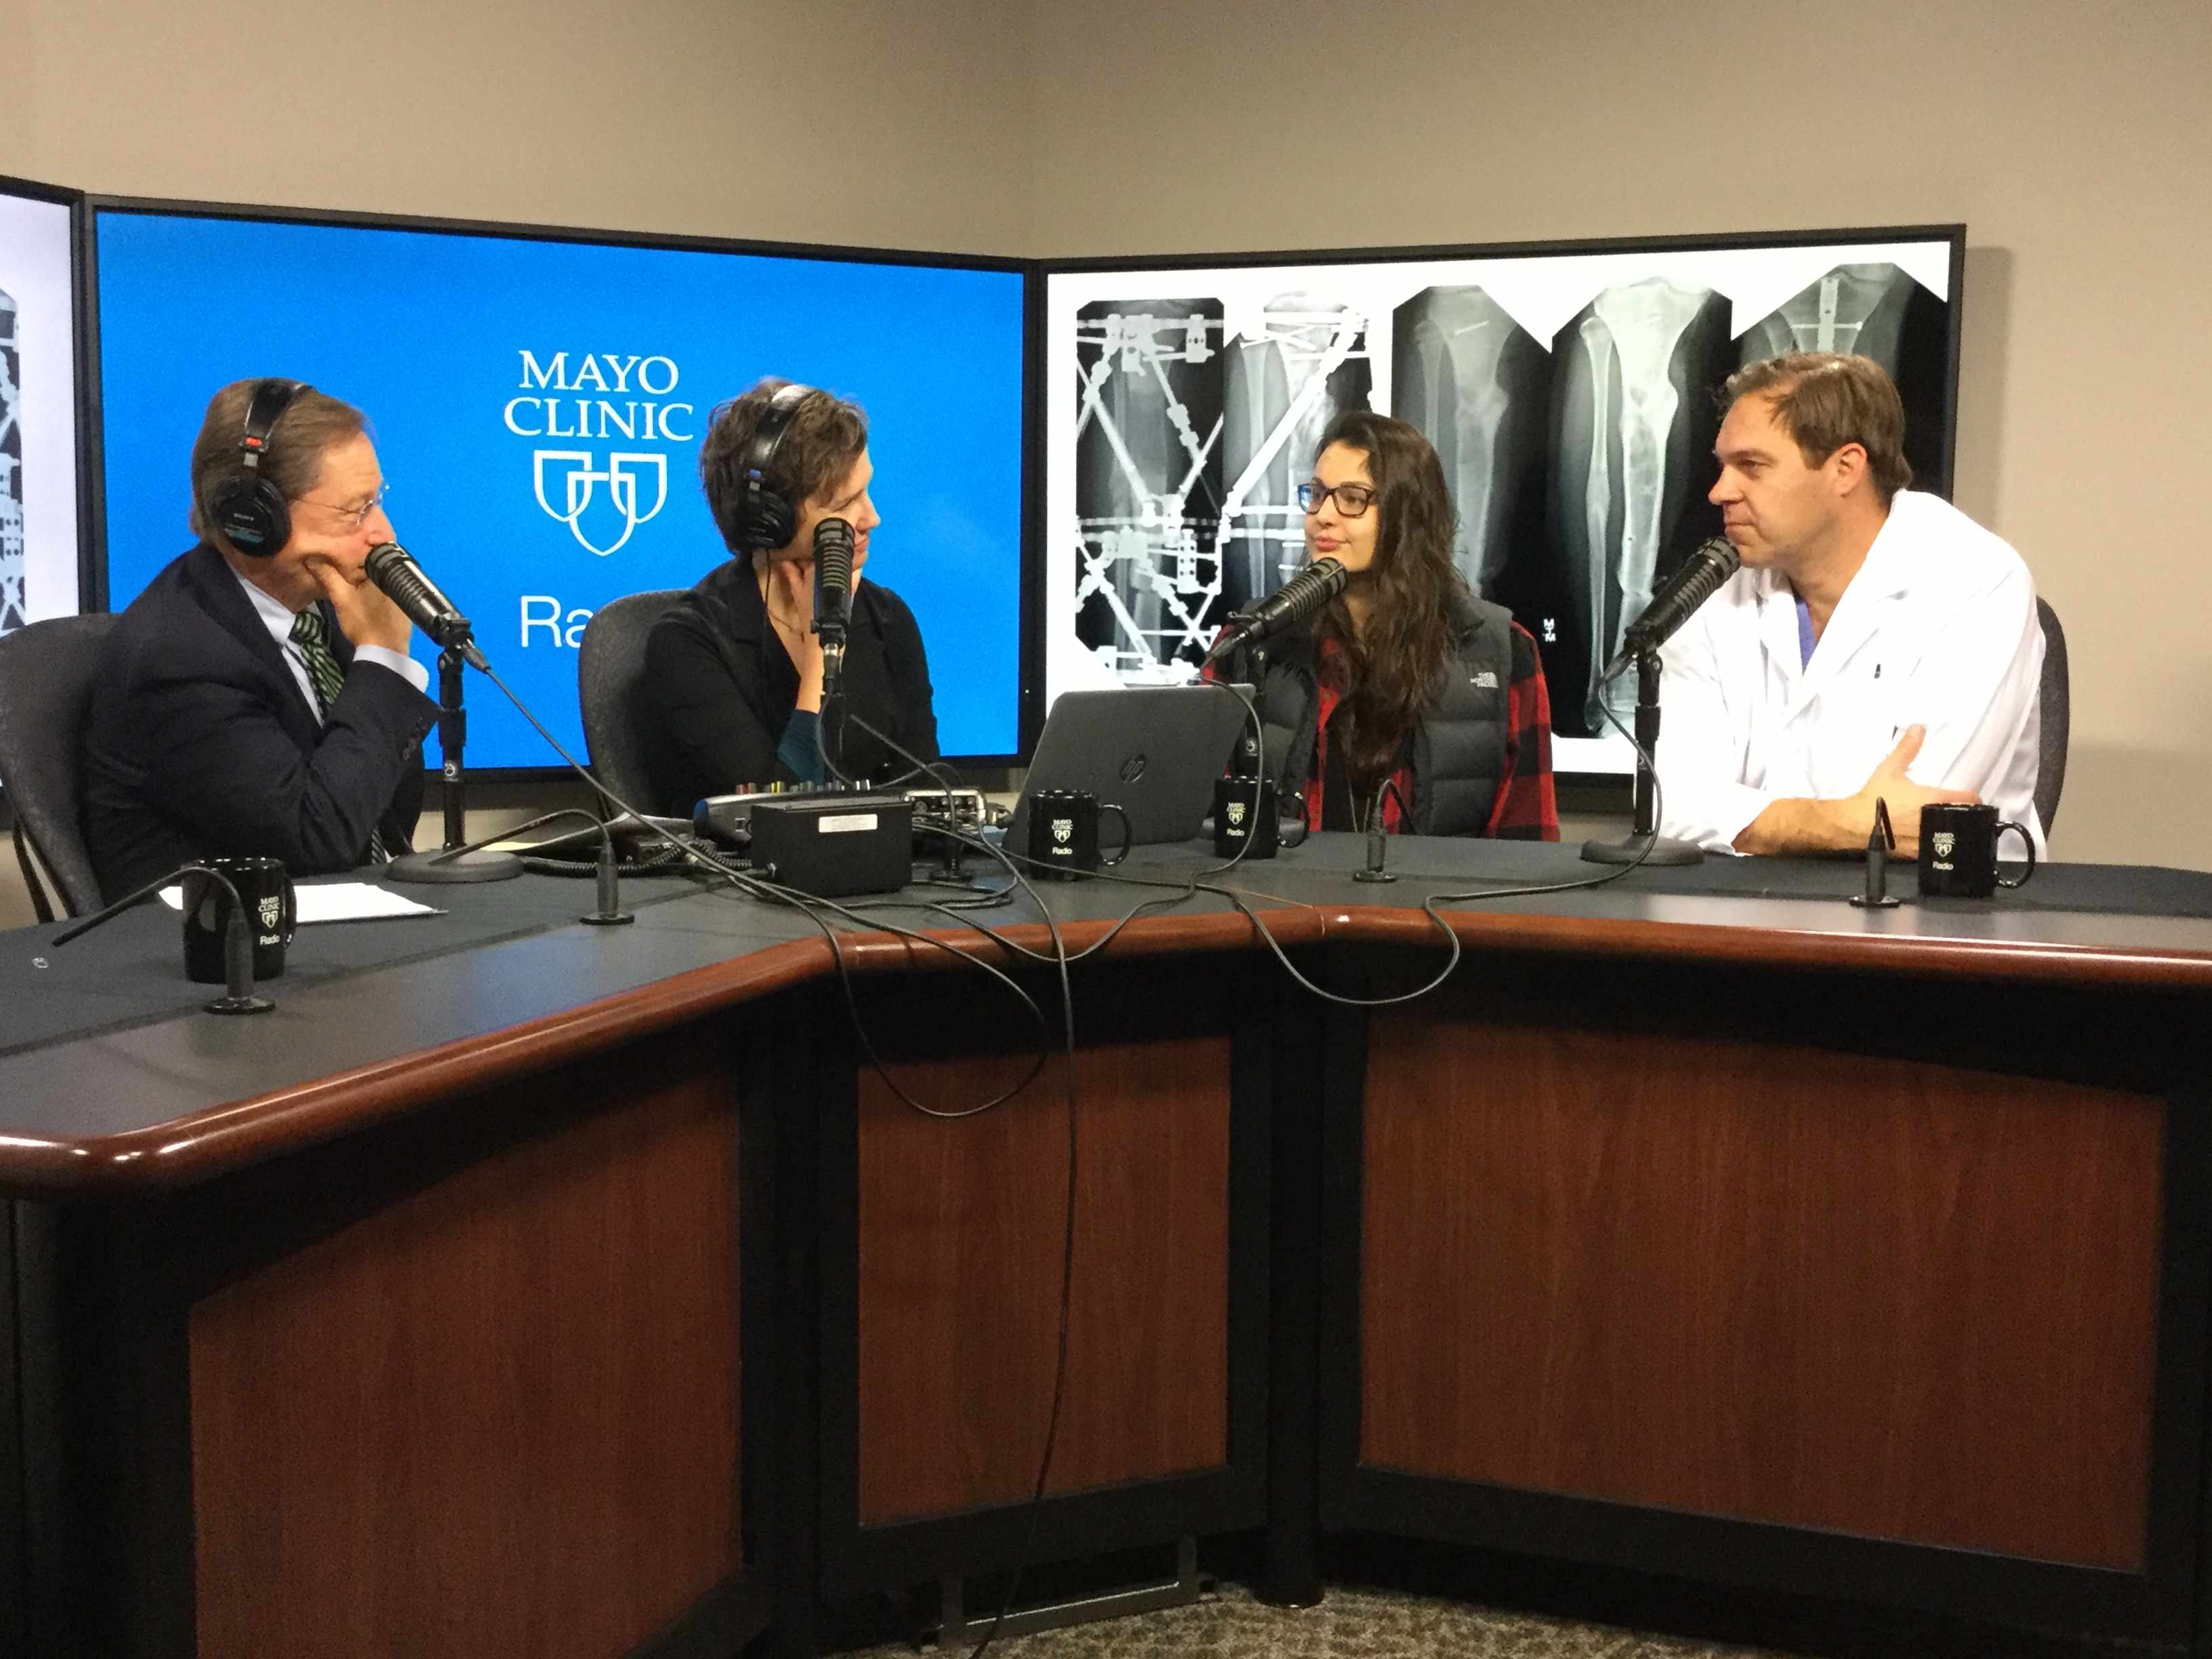 Dr. Andy Sems and Jessica Nelson being interviewed on Mayo Clinic Radio